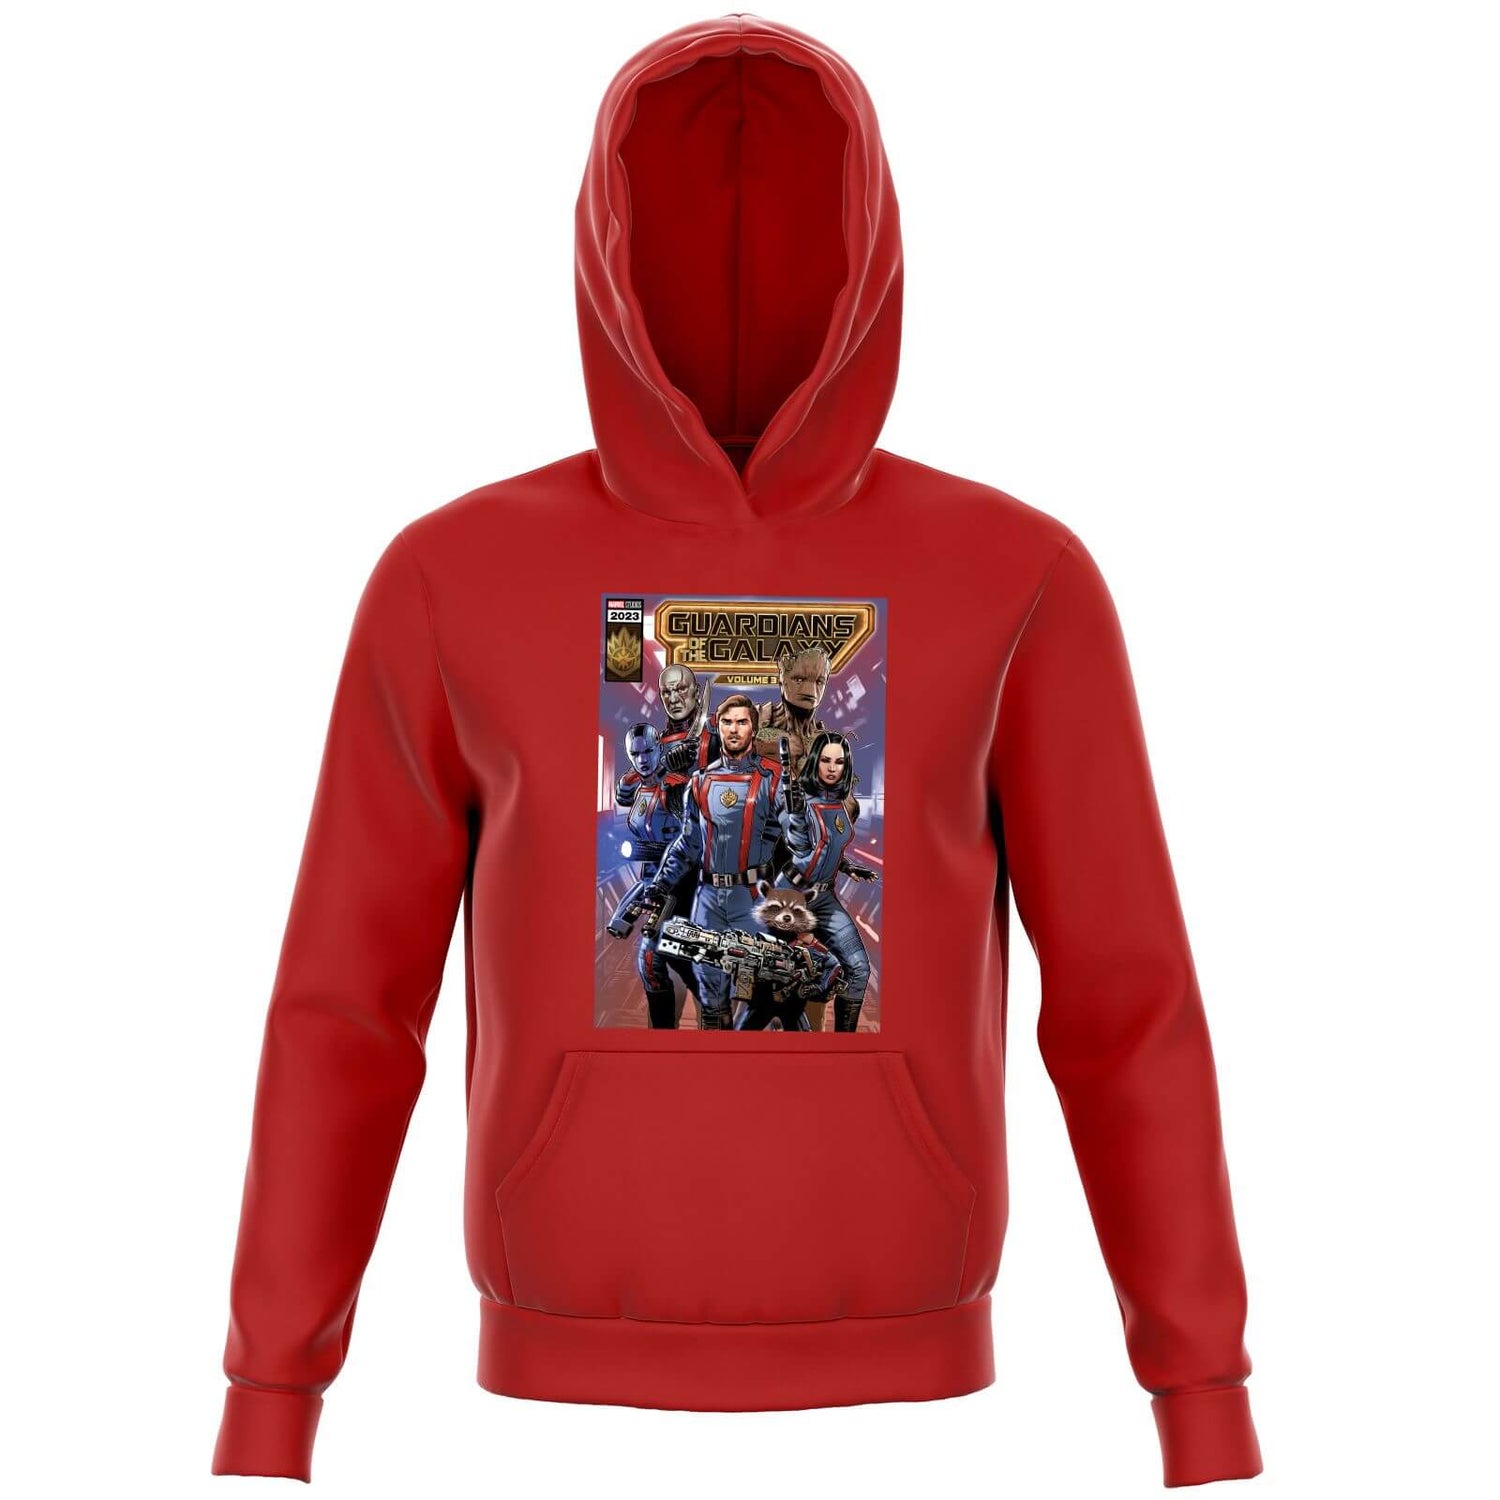 Guardians of the Galaxy Photo Comic Cover Kids' Hoodie - Red